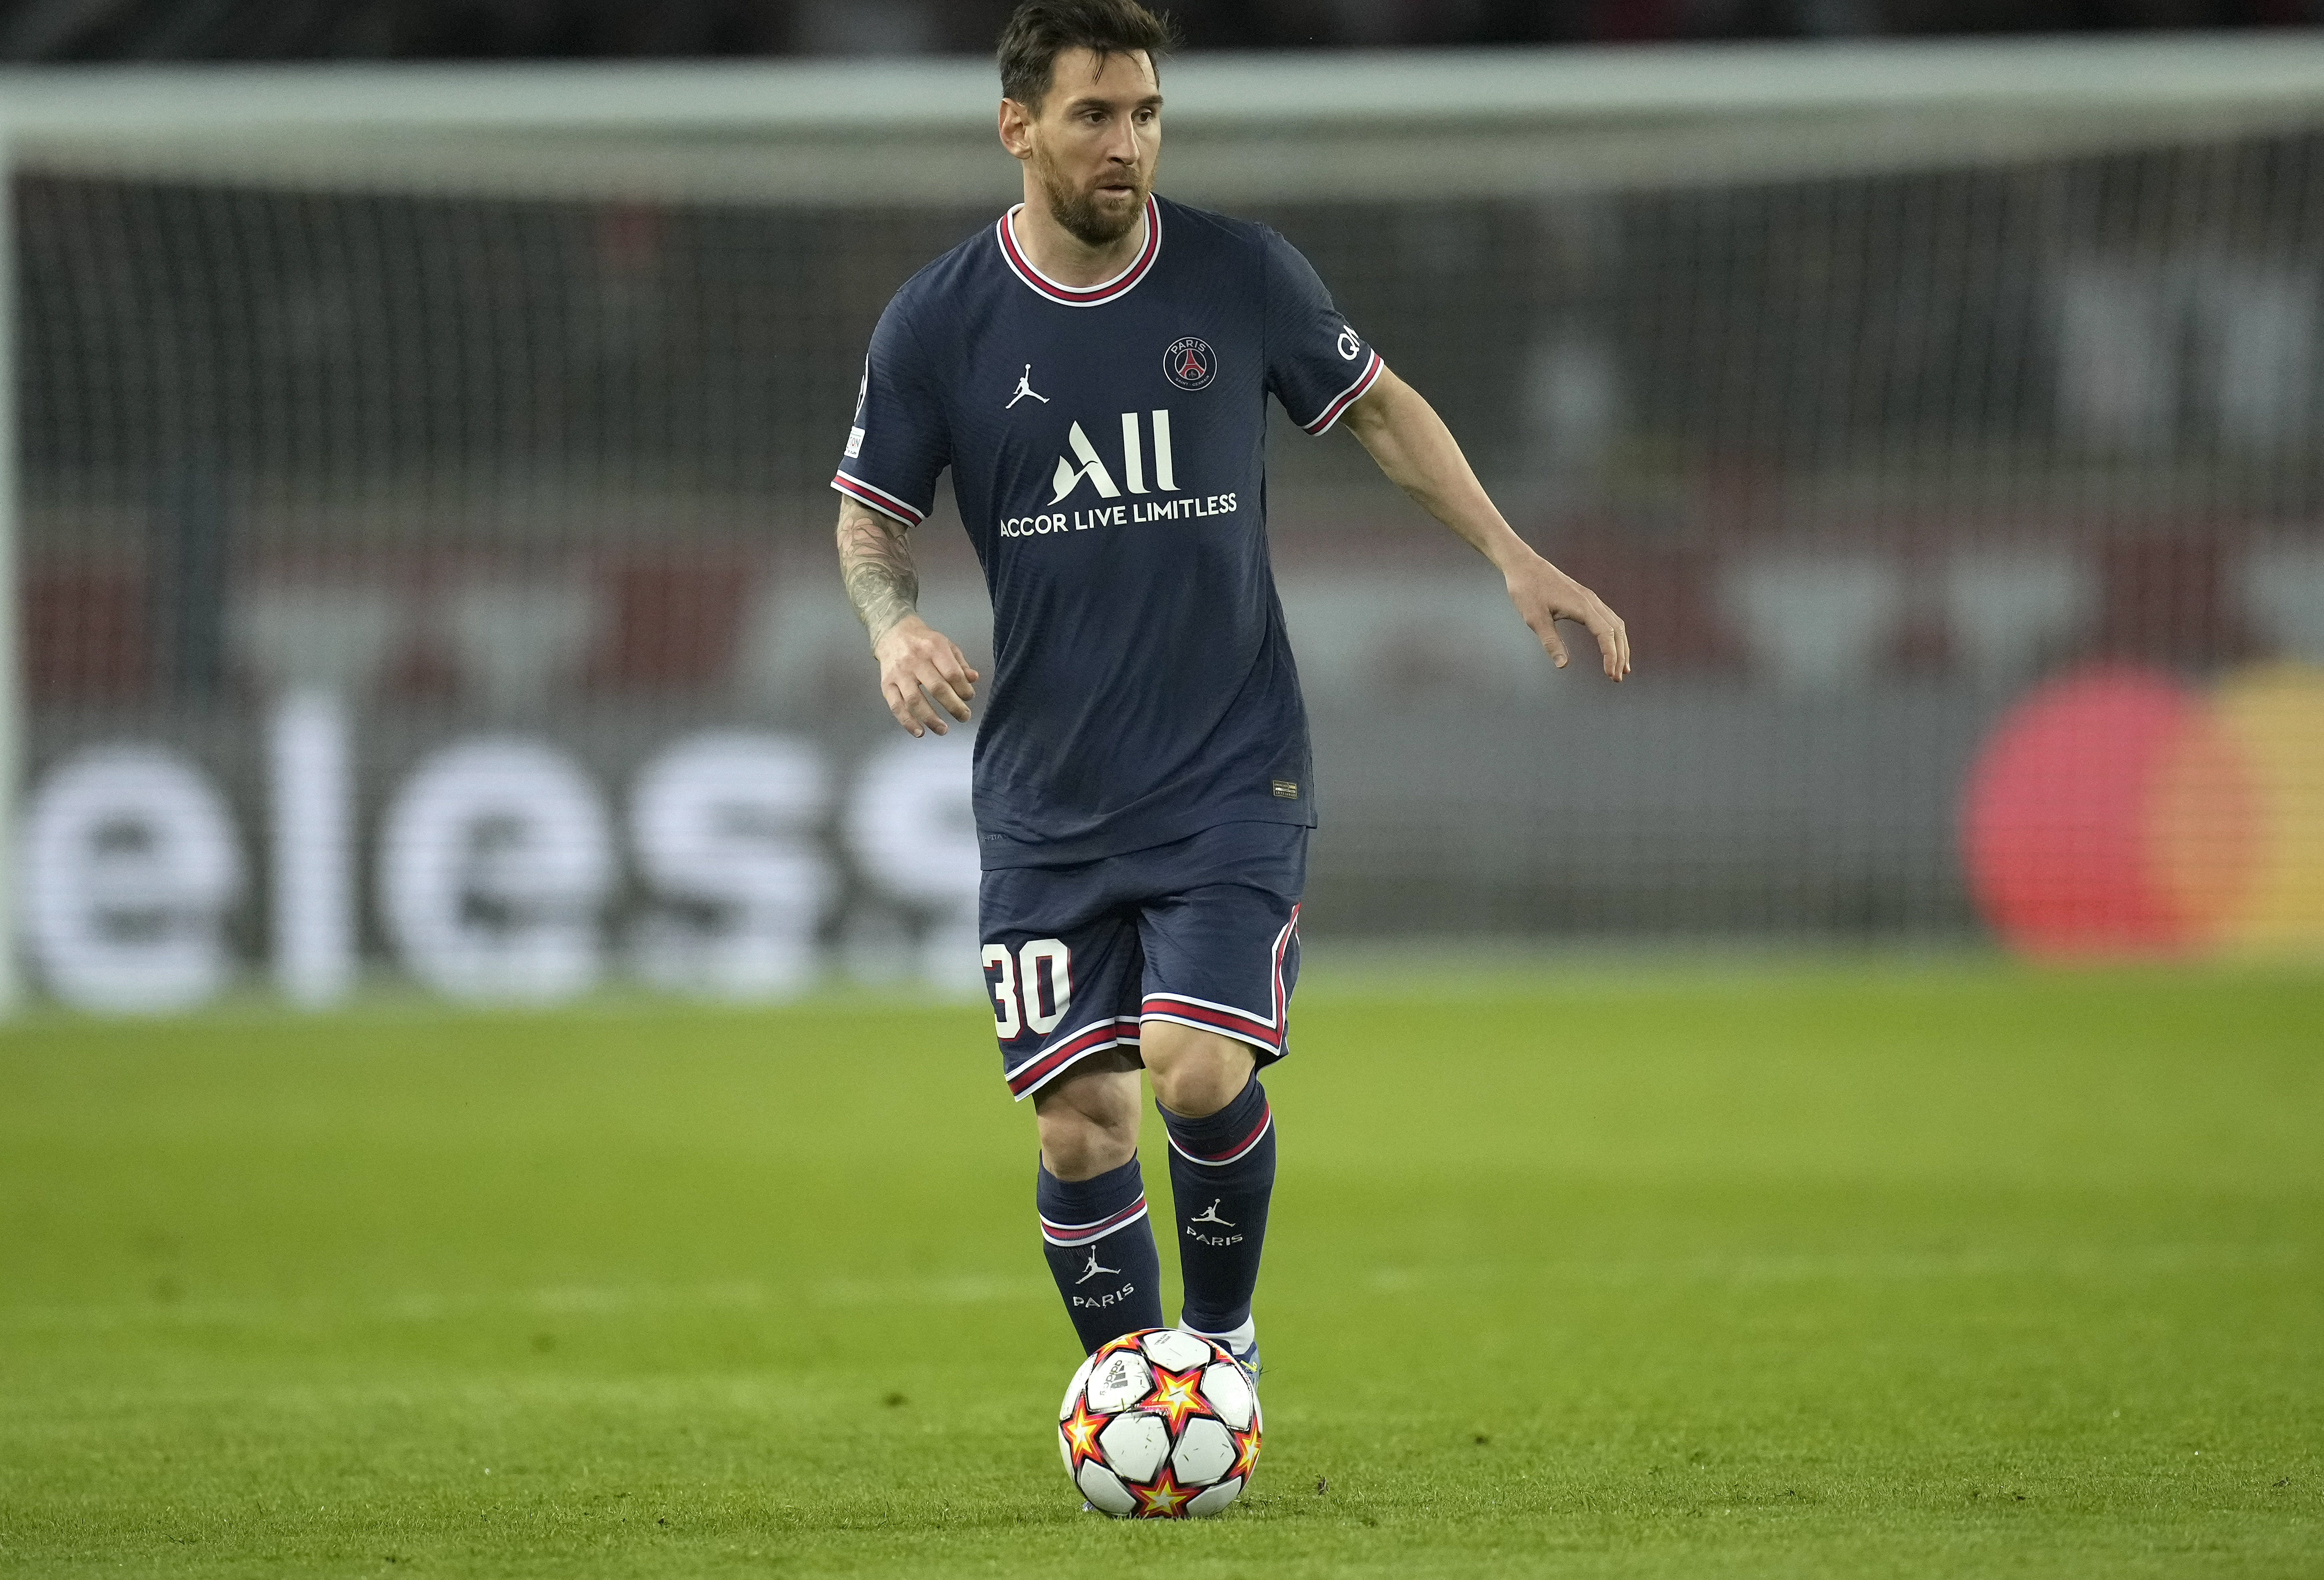 Lionel Messi Reveals He Had Offers from 'Various Clubs' Before Signing PSG Contract - Bleacher Report - Latest News, Videos and Highlights